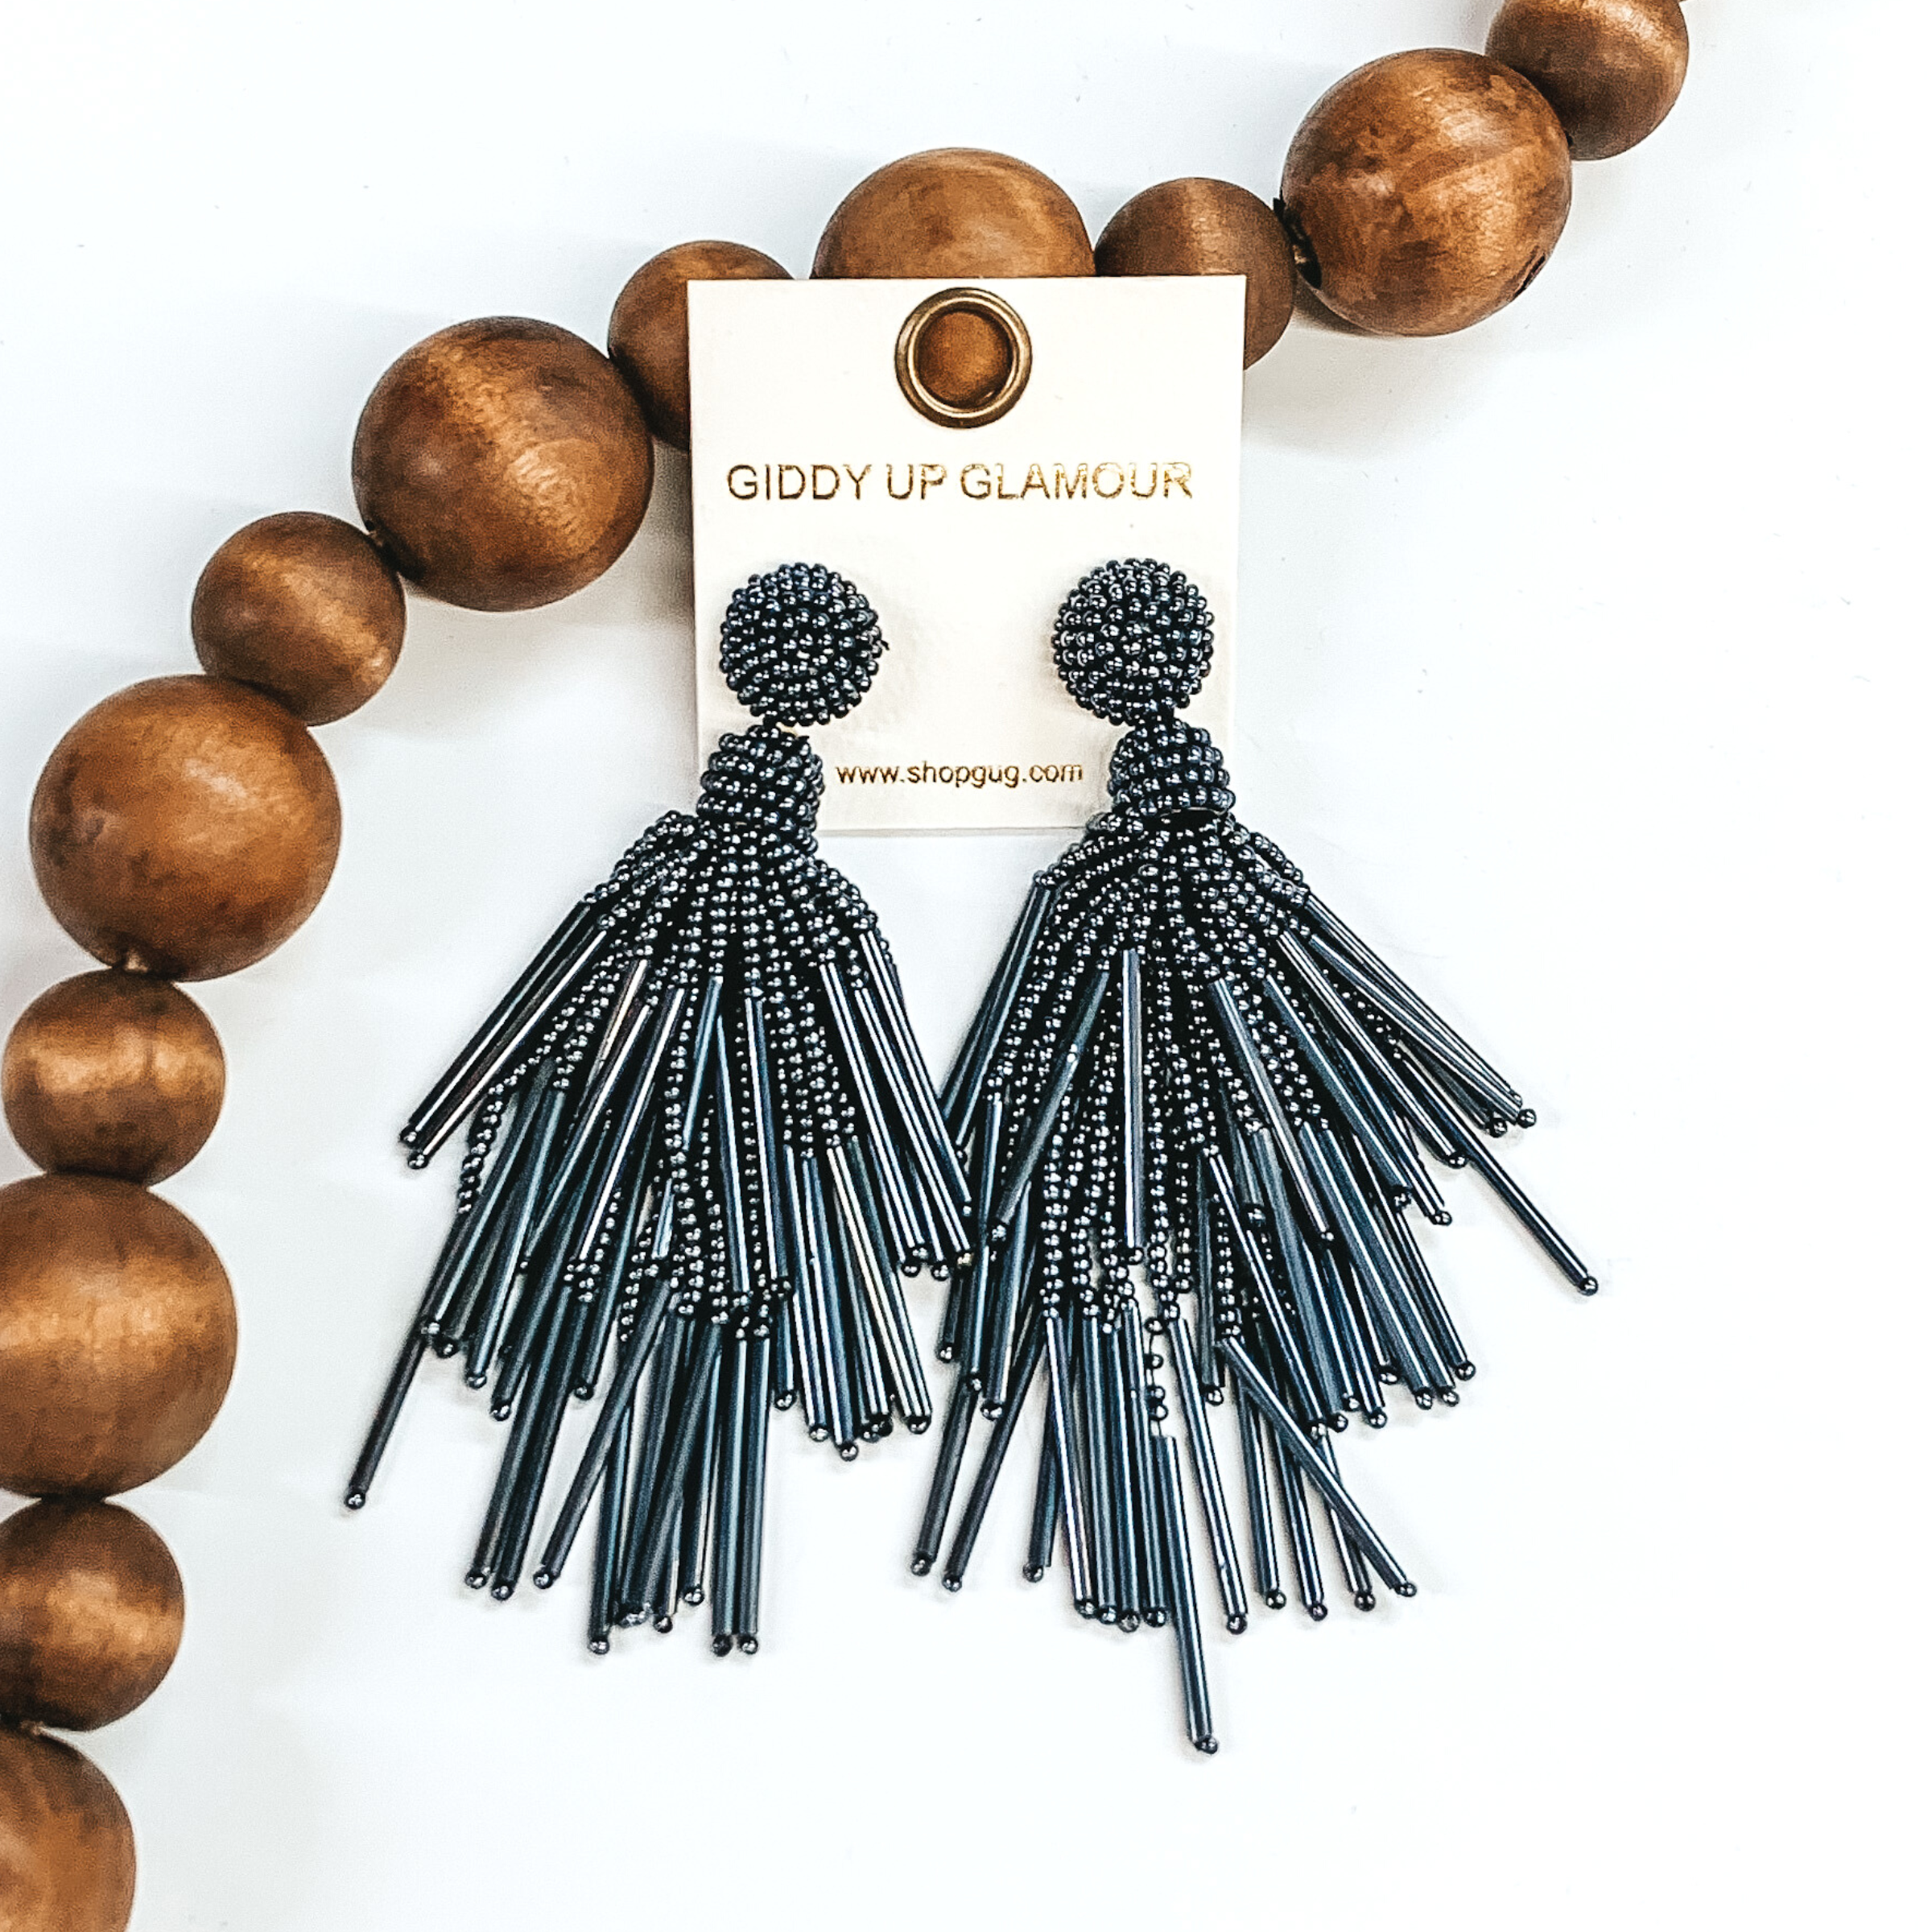 Circle beaded stud earrings with a beaded tassel in hema. These earrings are pictured on a white background with brown beads behind them.